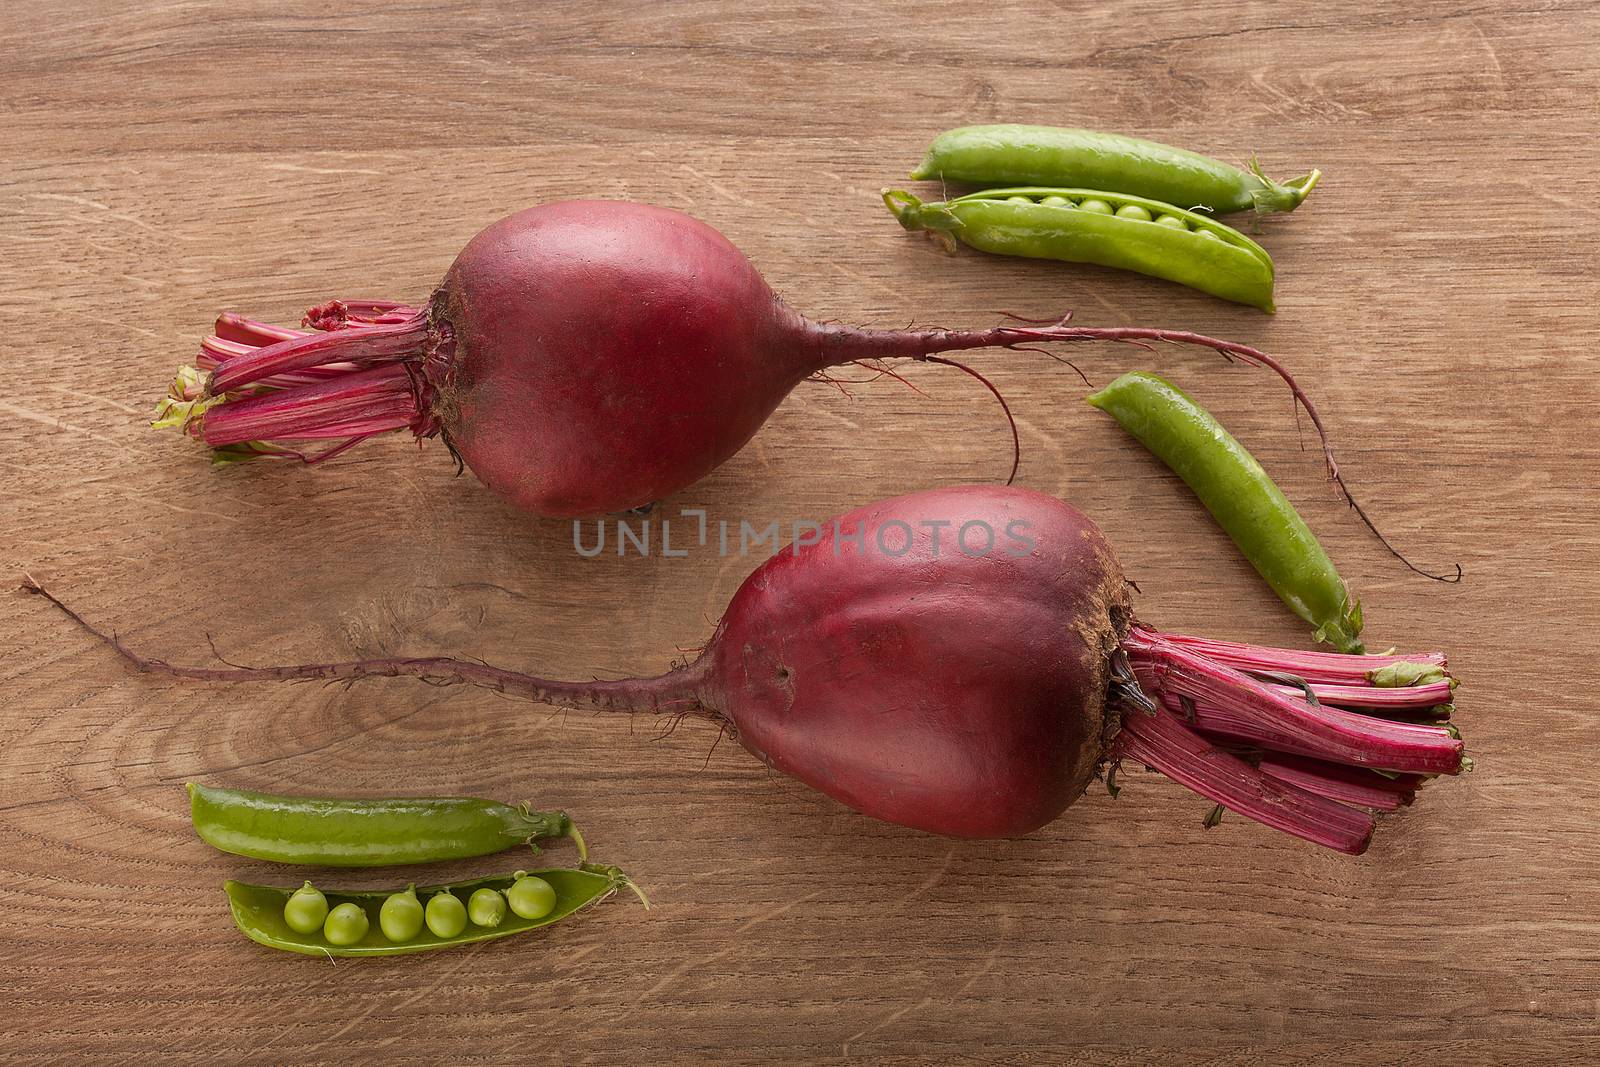 Beet and pea pods on the wood by Angorius